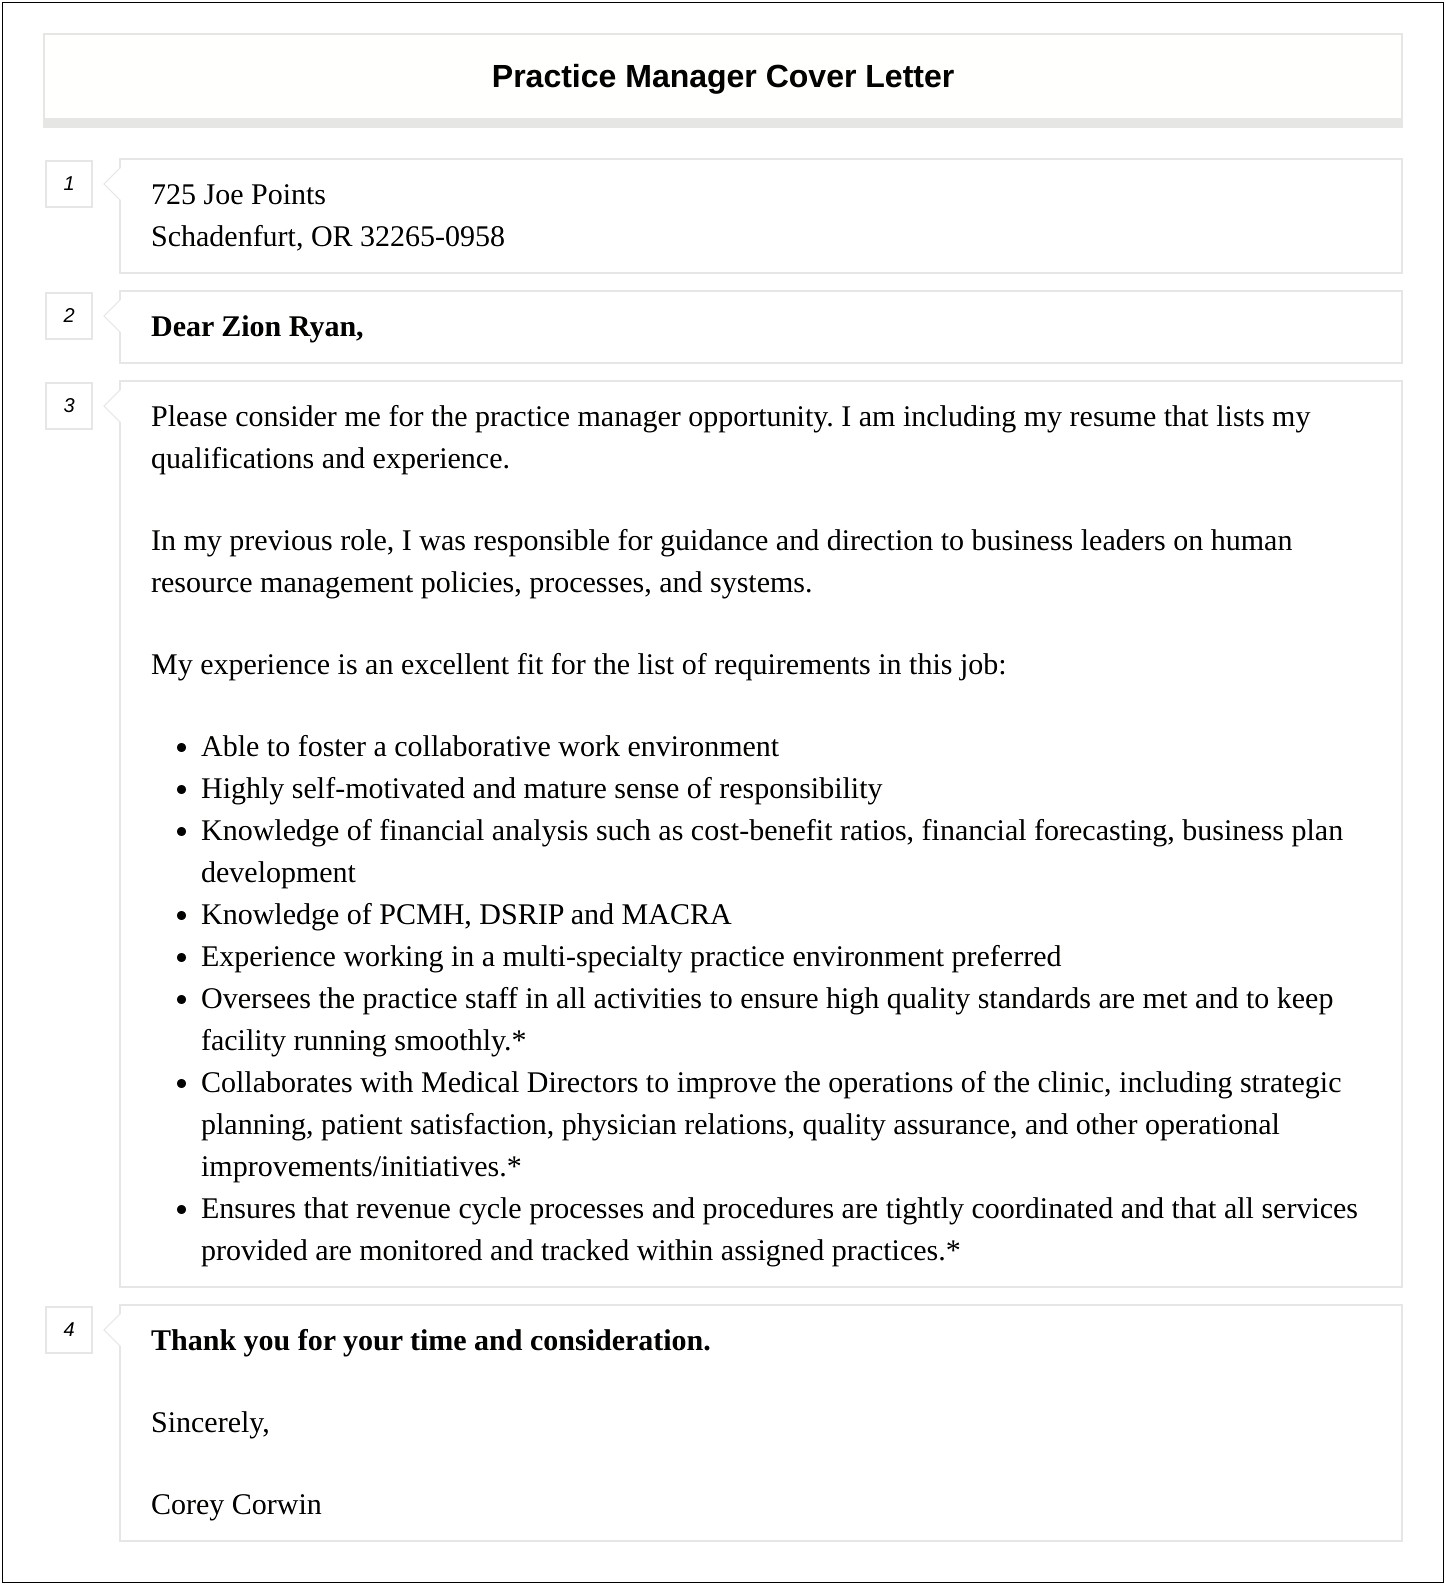 Resume Cover Letter For Medical Practice Manager